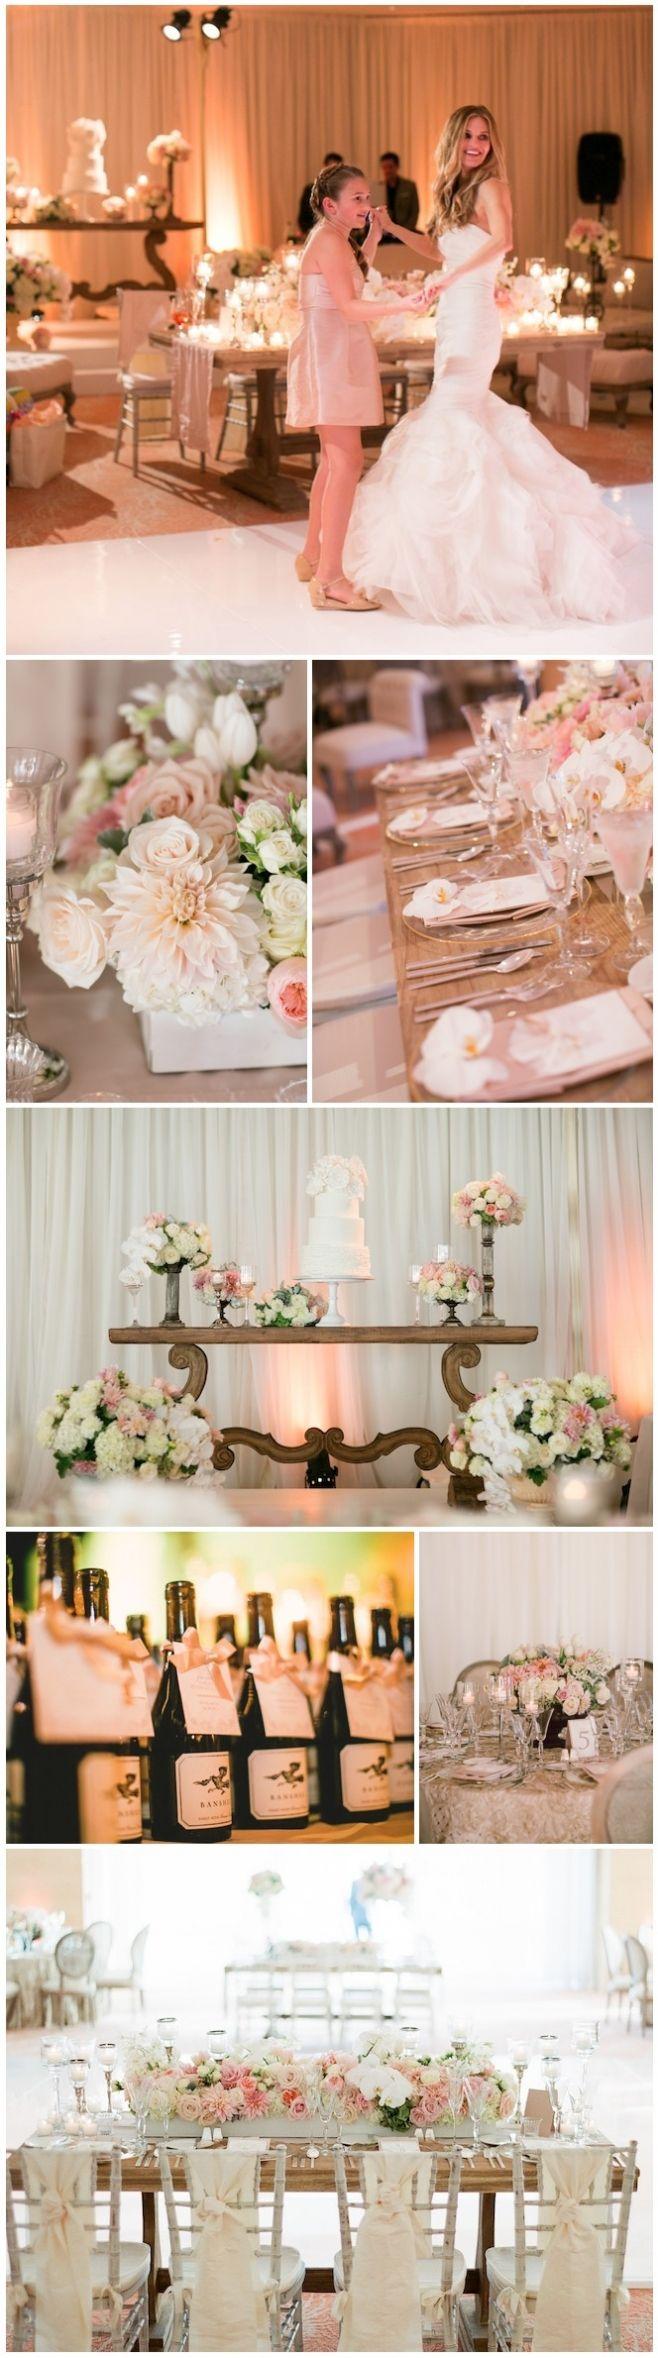 Wedding - Blush Pink- The Most Requested Wedding Color For 2013